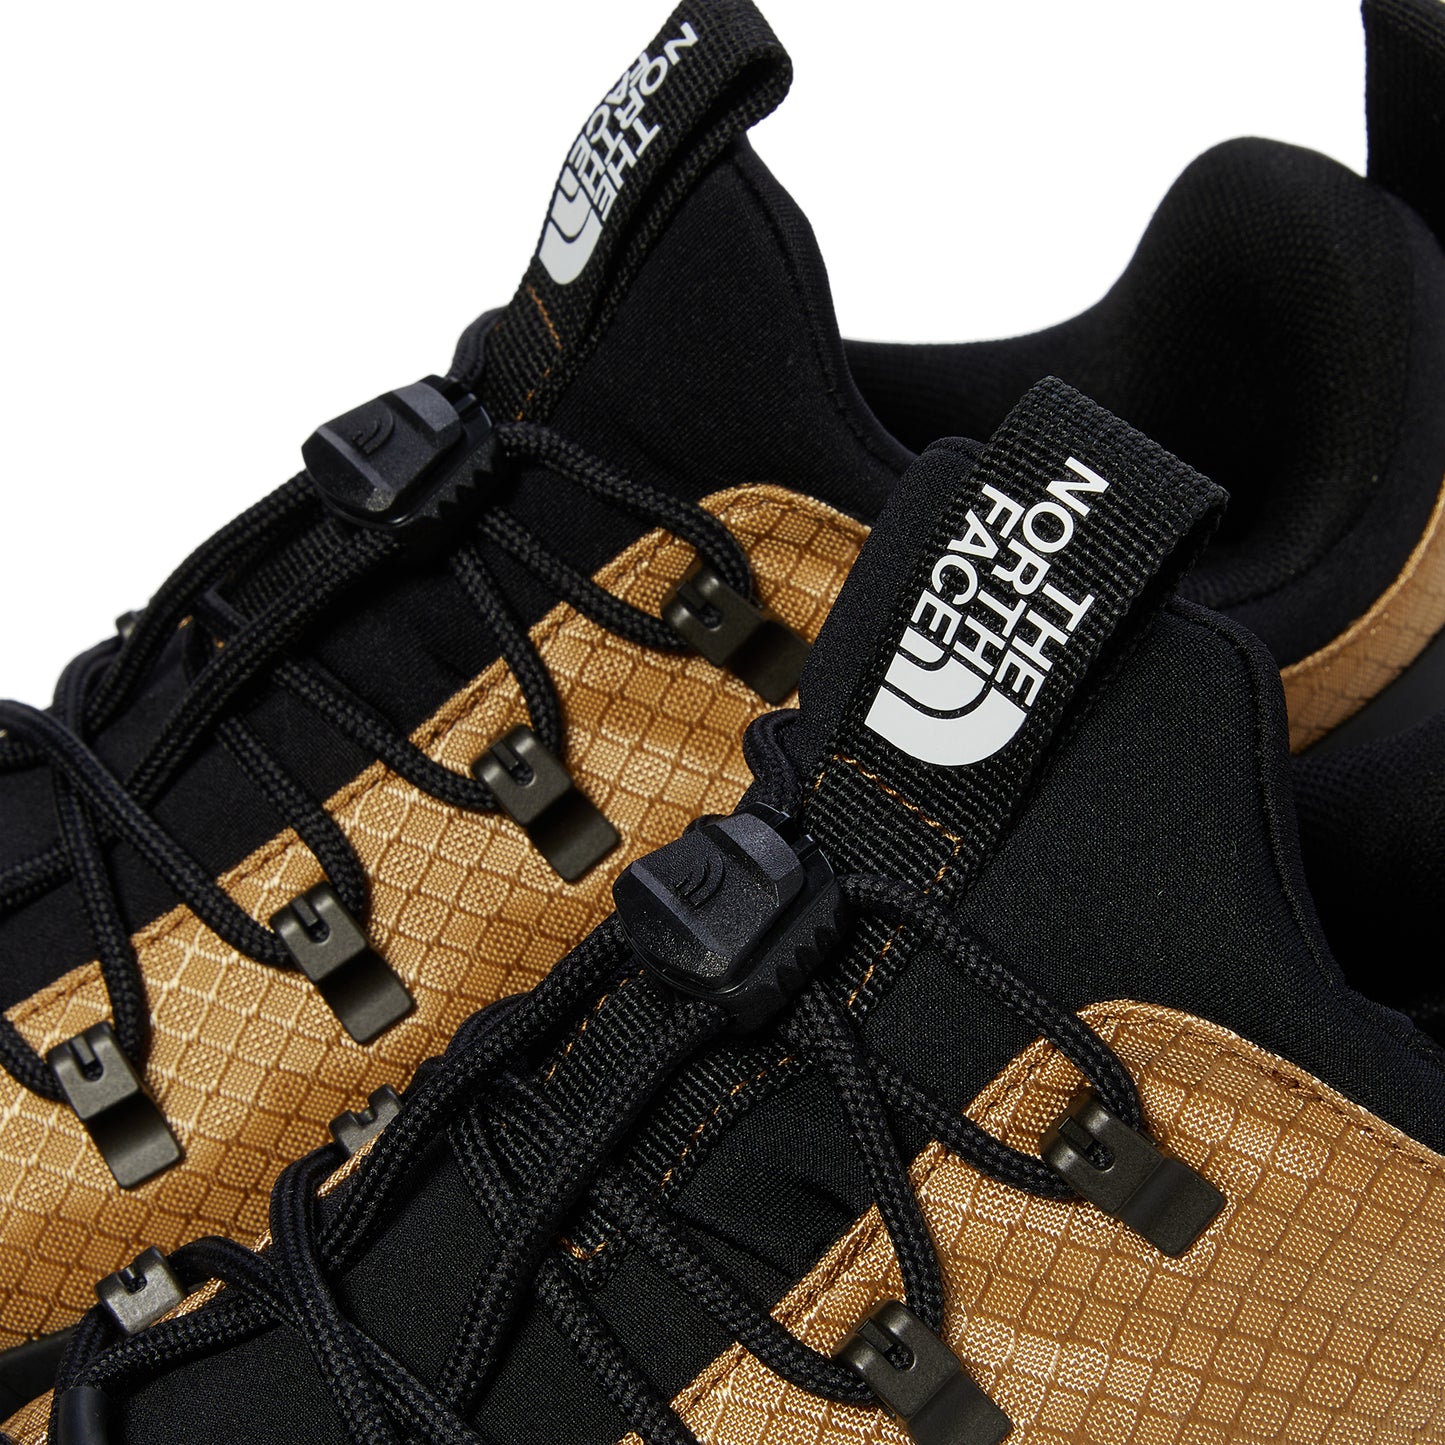 The North Face Glenclyffe Low (Almond Butter/TNF Black)